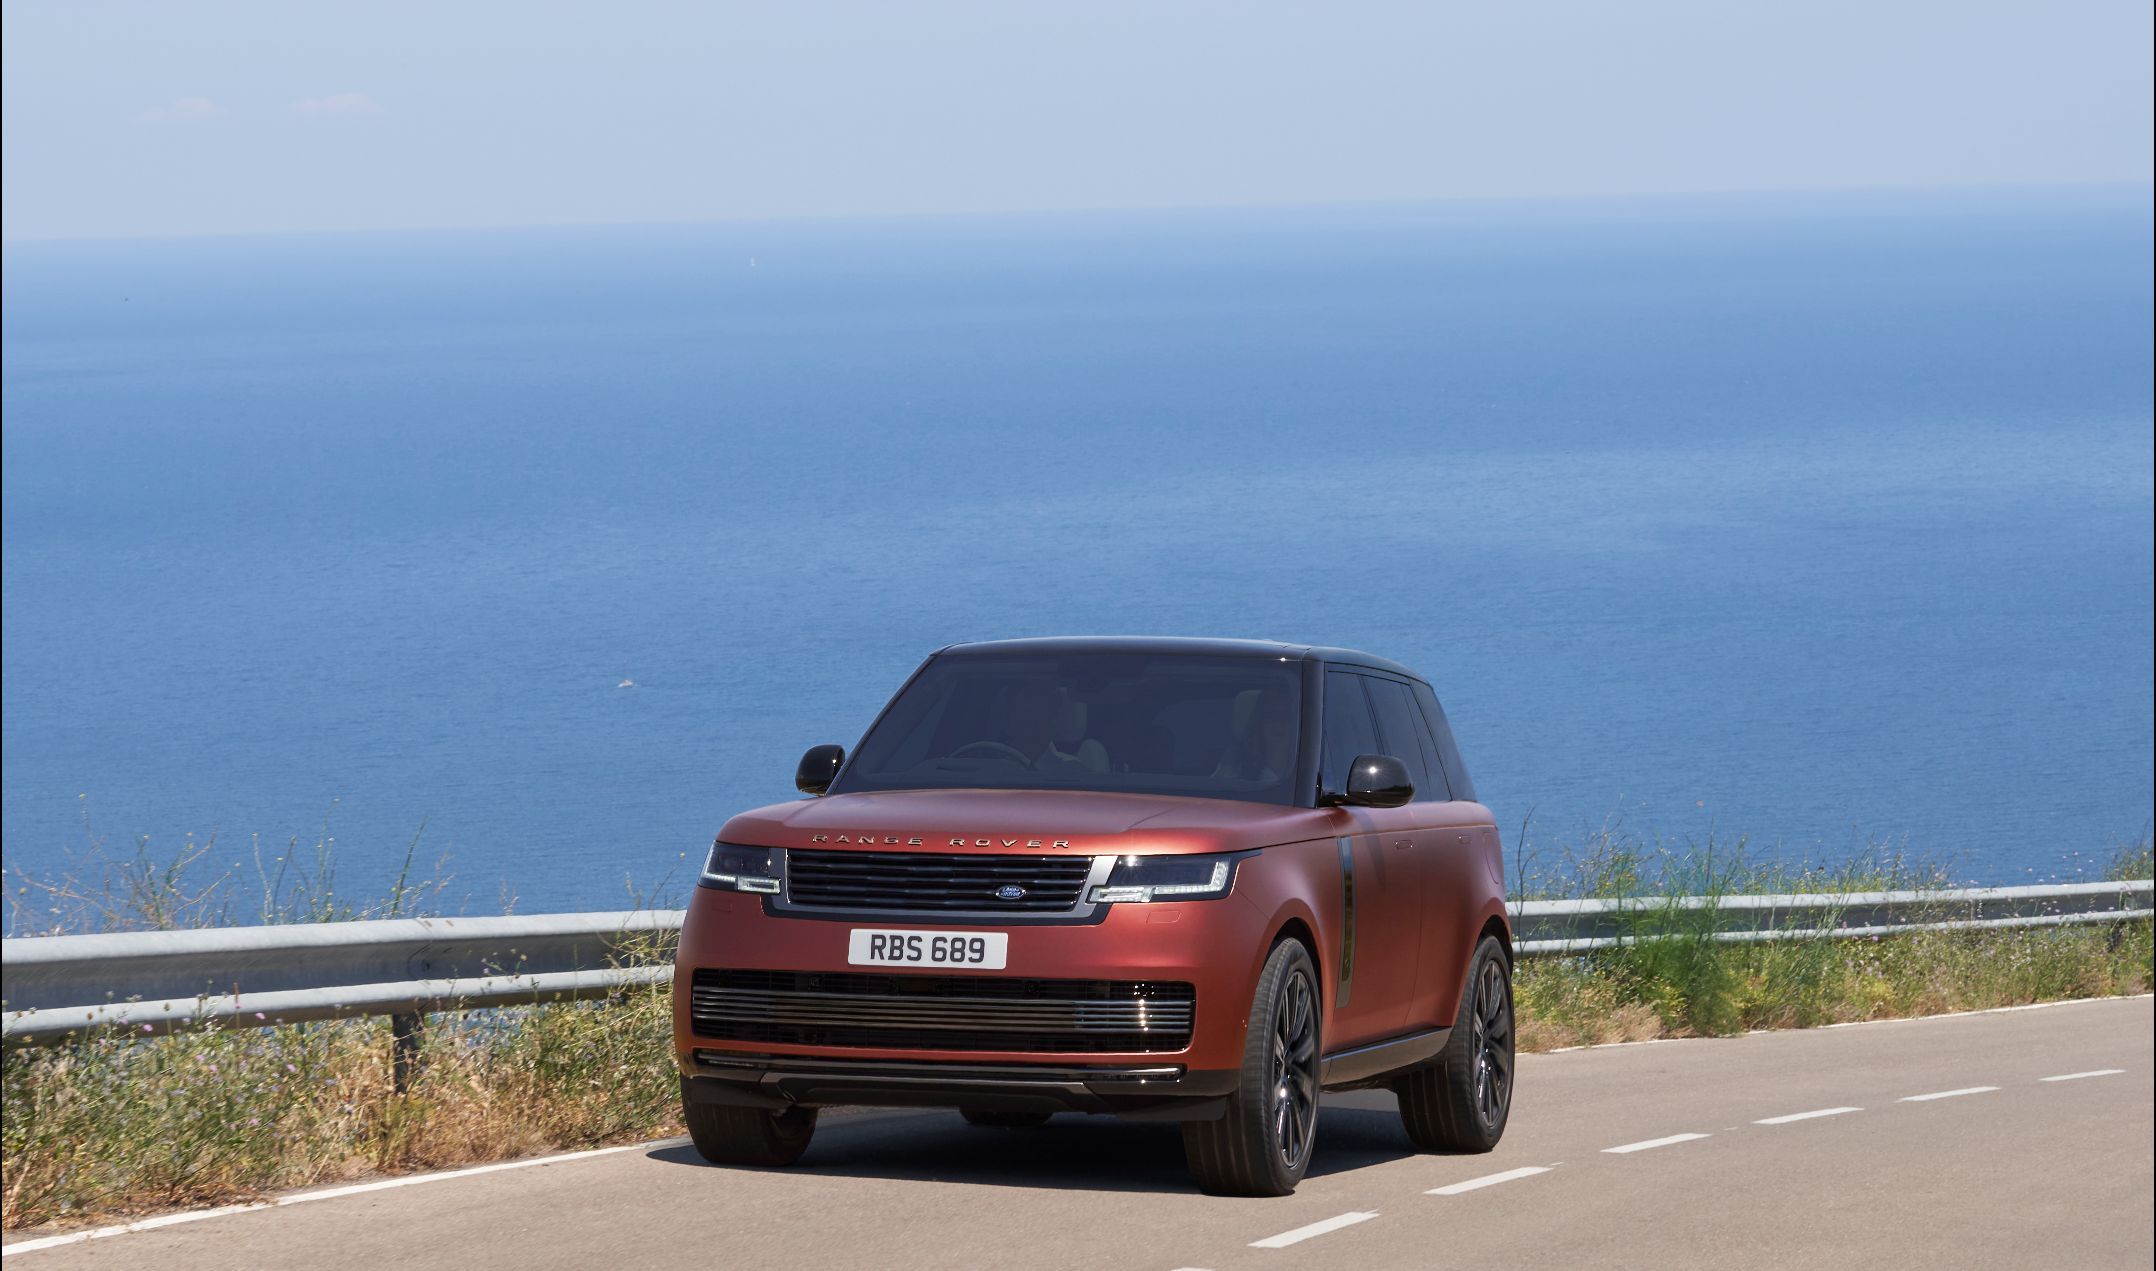 All-New Range Rover Is Minimalist on the Outside, Loaded on the Inside